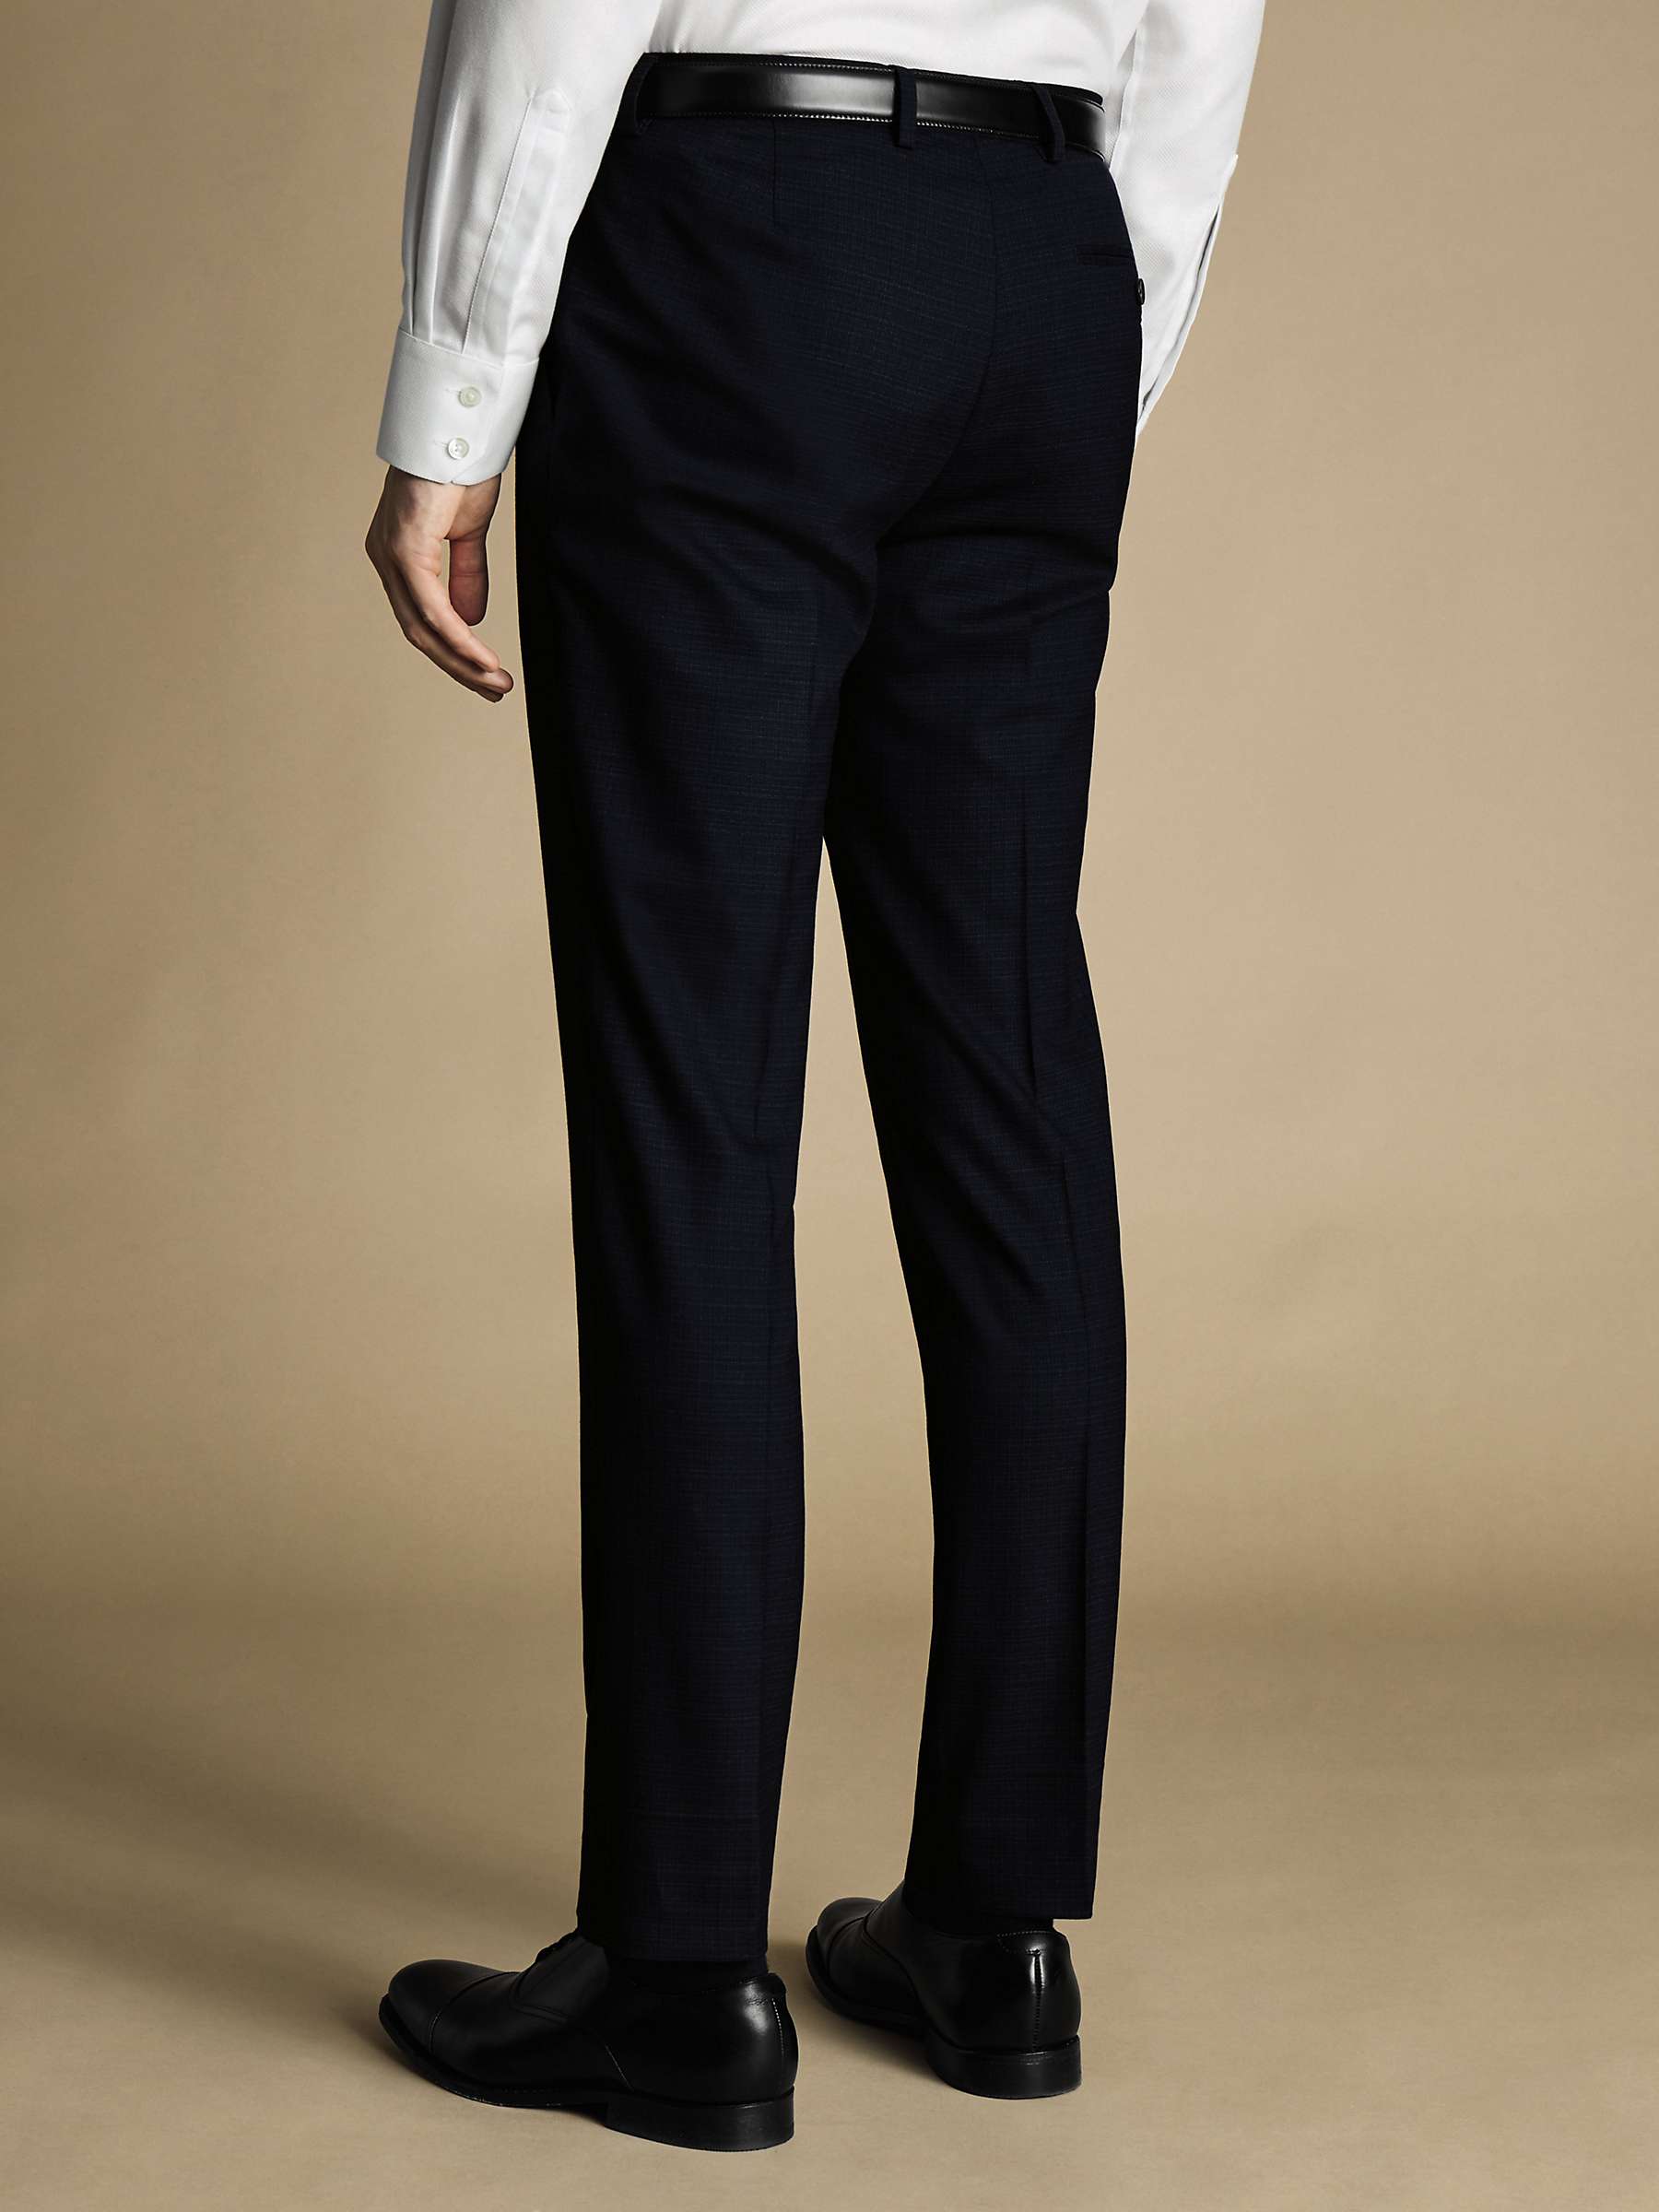 Buy Charles Tyrwhitt Micro Grid Check Slim Fit Suit Trousers Online at johnlewis.com